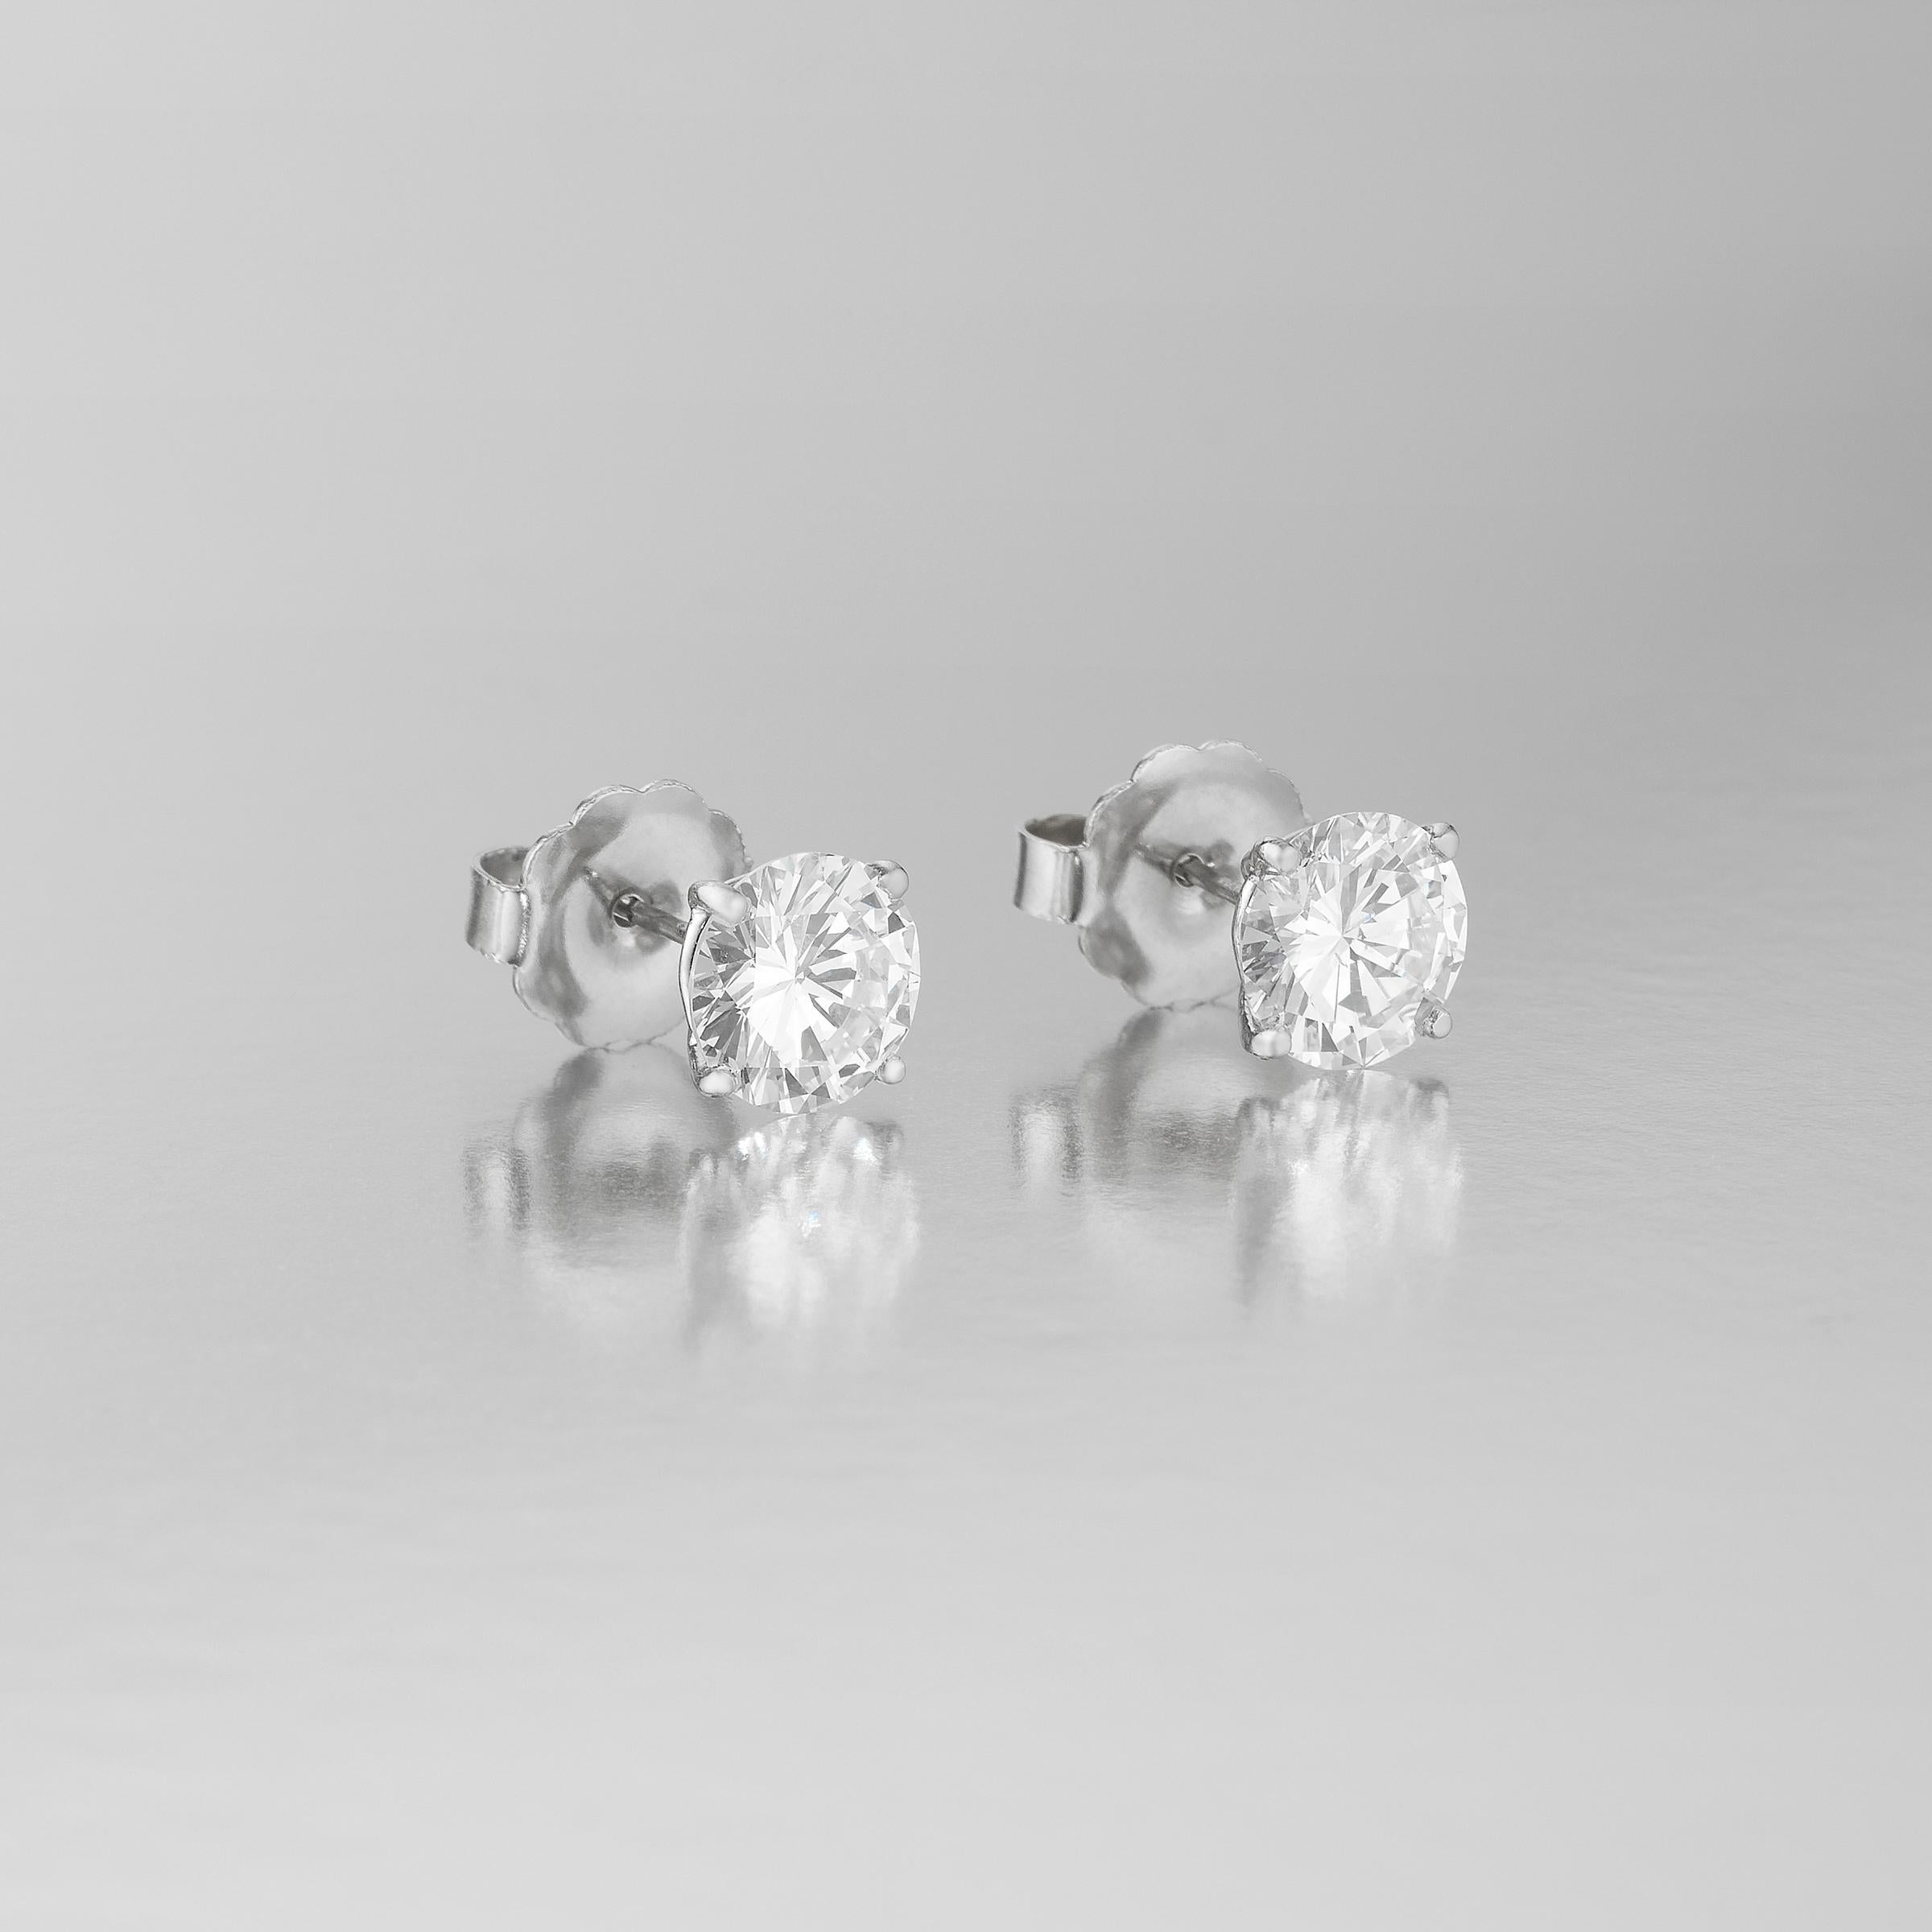 Exceptional diamond solitaire stud earrings showcasing 2 spectacular GIA Certified round brilliant-cut diamonds weighing 4.10 carats in total. They are accompanied by 2 GIA certificates showing the 2.10 carat round brilliant diamond is F color / VS2